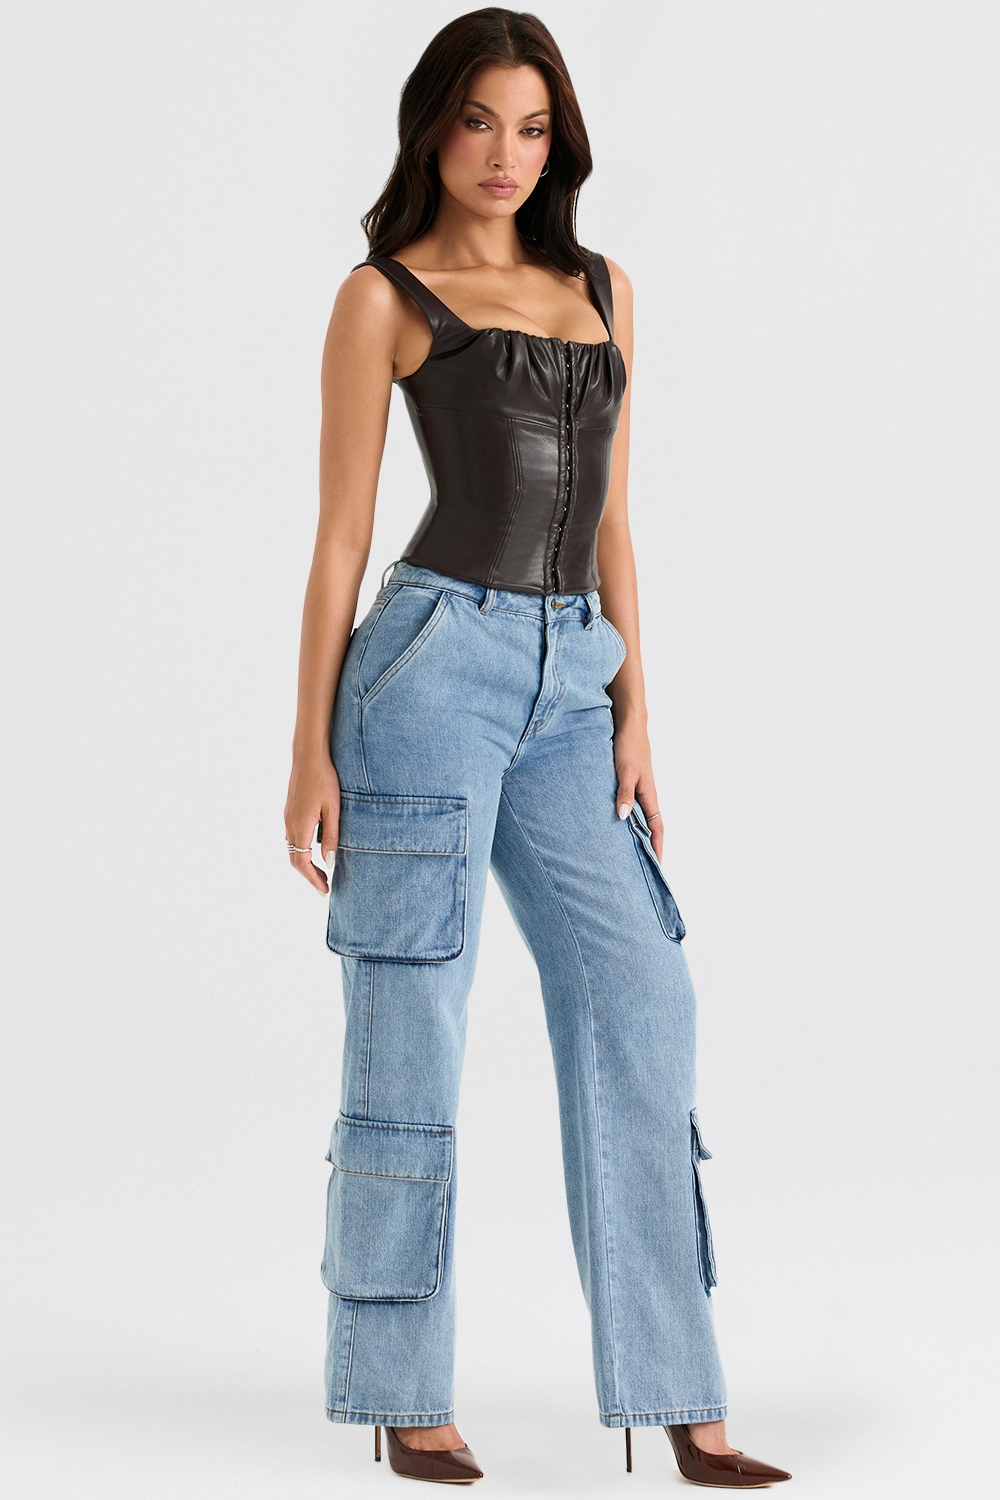 Ria, Blue Washed Utility Jeans